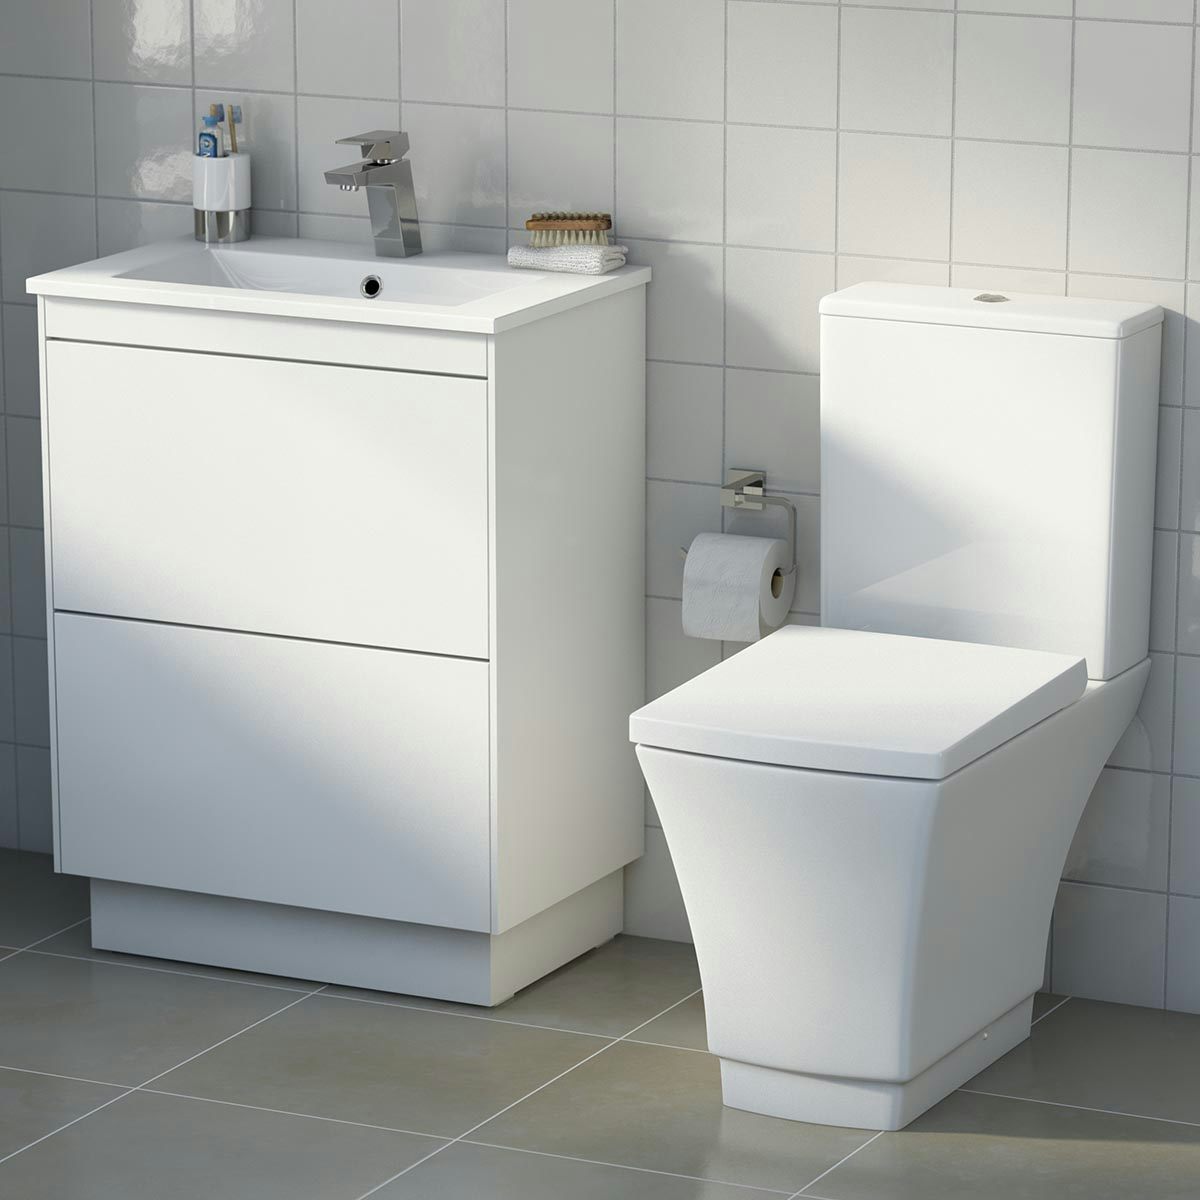 Mode Austin close coupled toilet and white vanity unit suite 600mm